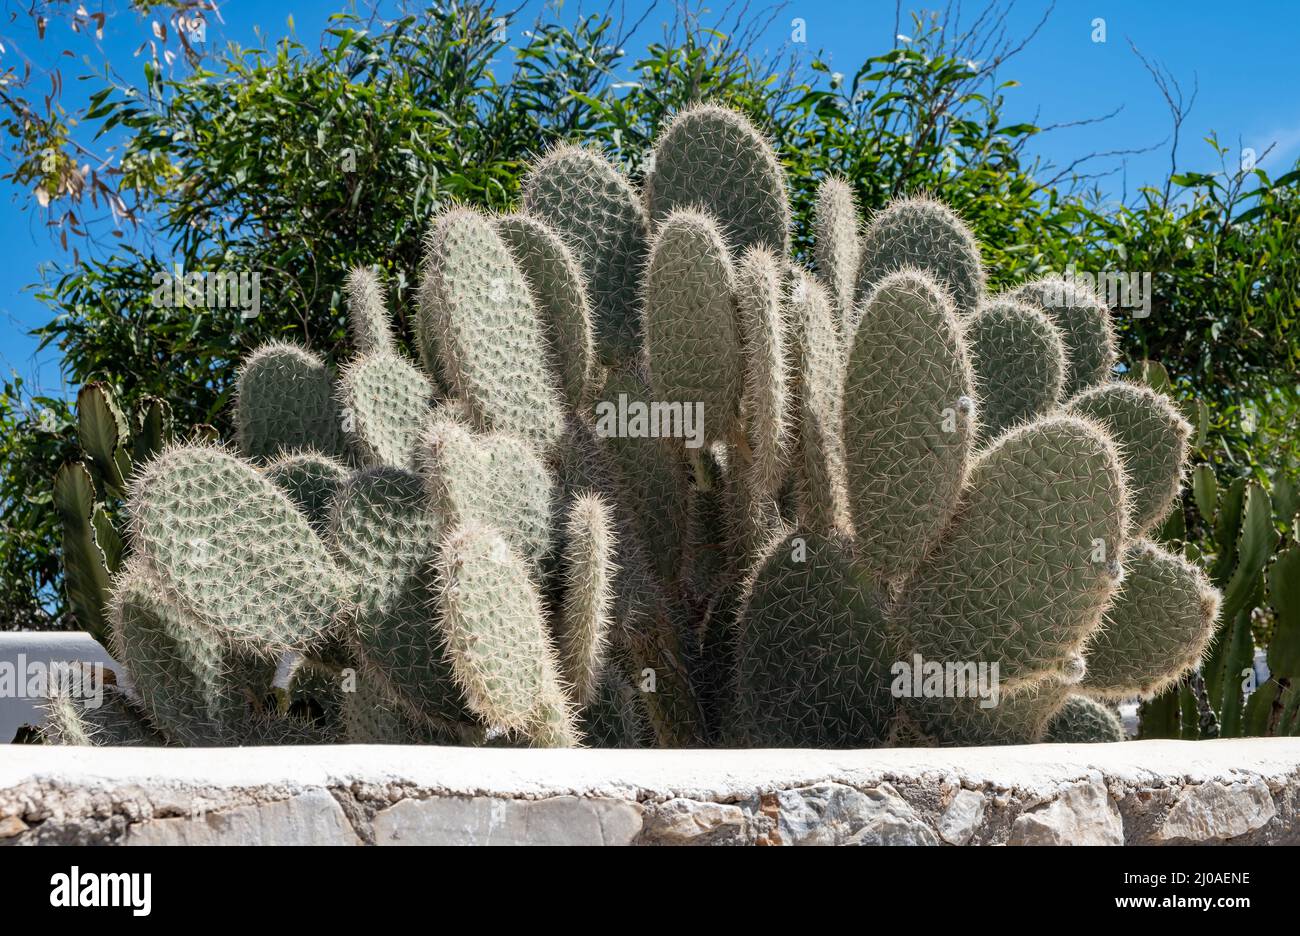 Cactus opuntia, Prickly pear plant, blue sky backgrpund, sunny day. Also known as Angel wing or bunny ears cactus, Mediterranean flora Stock Photo